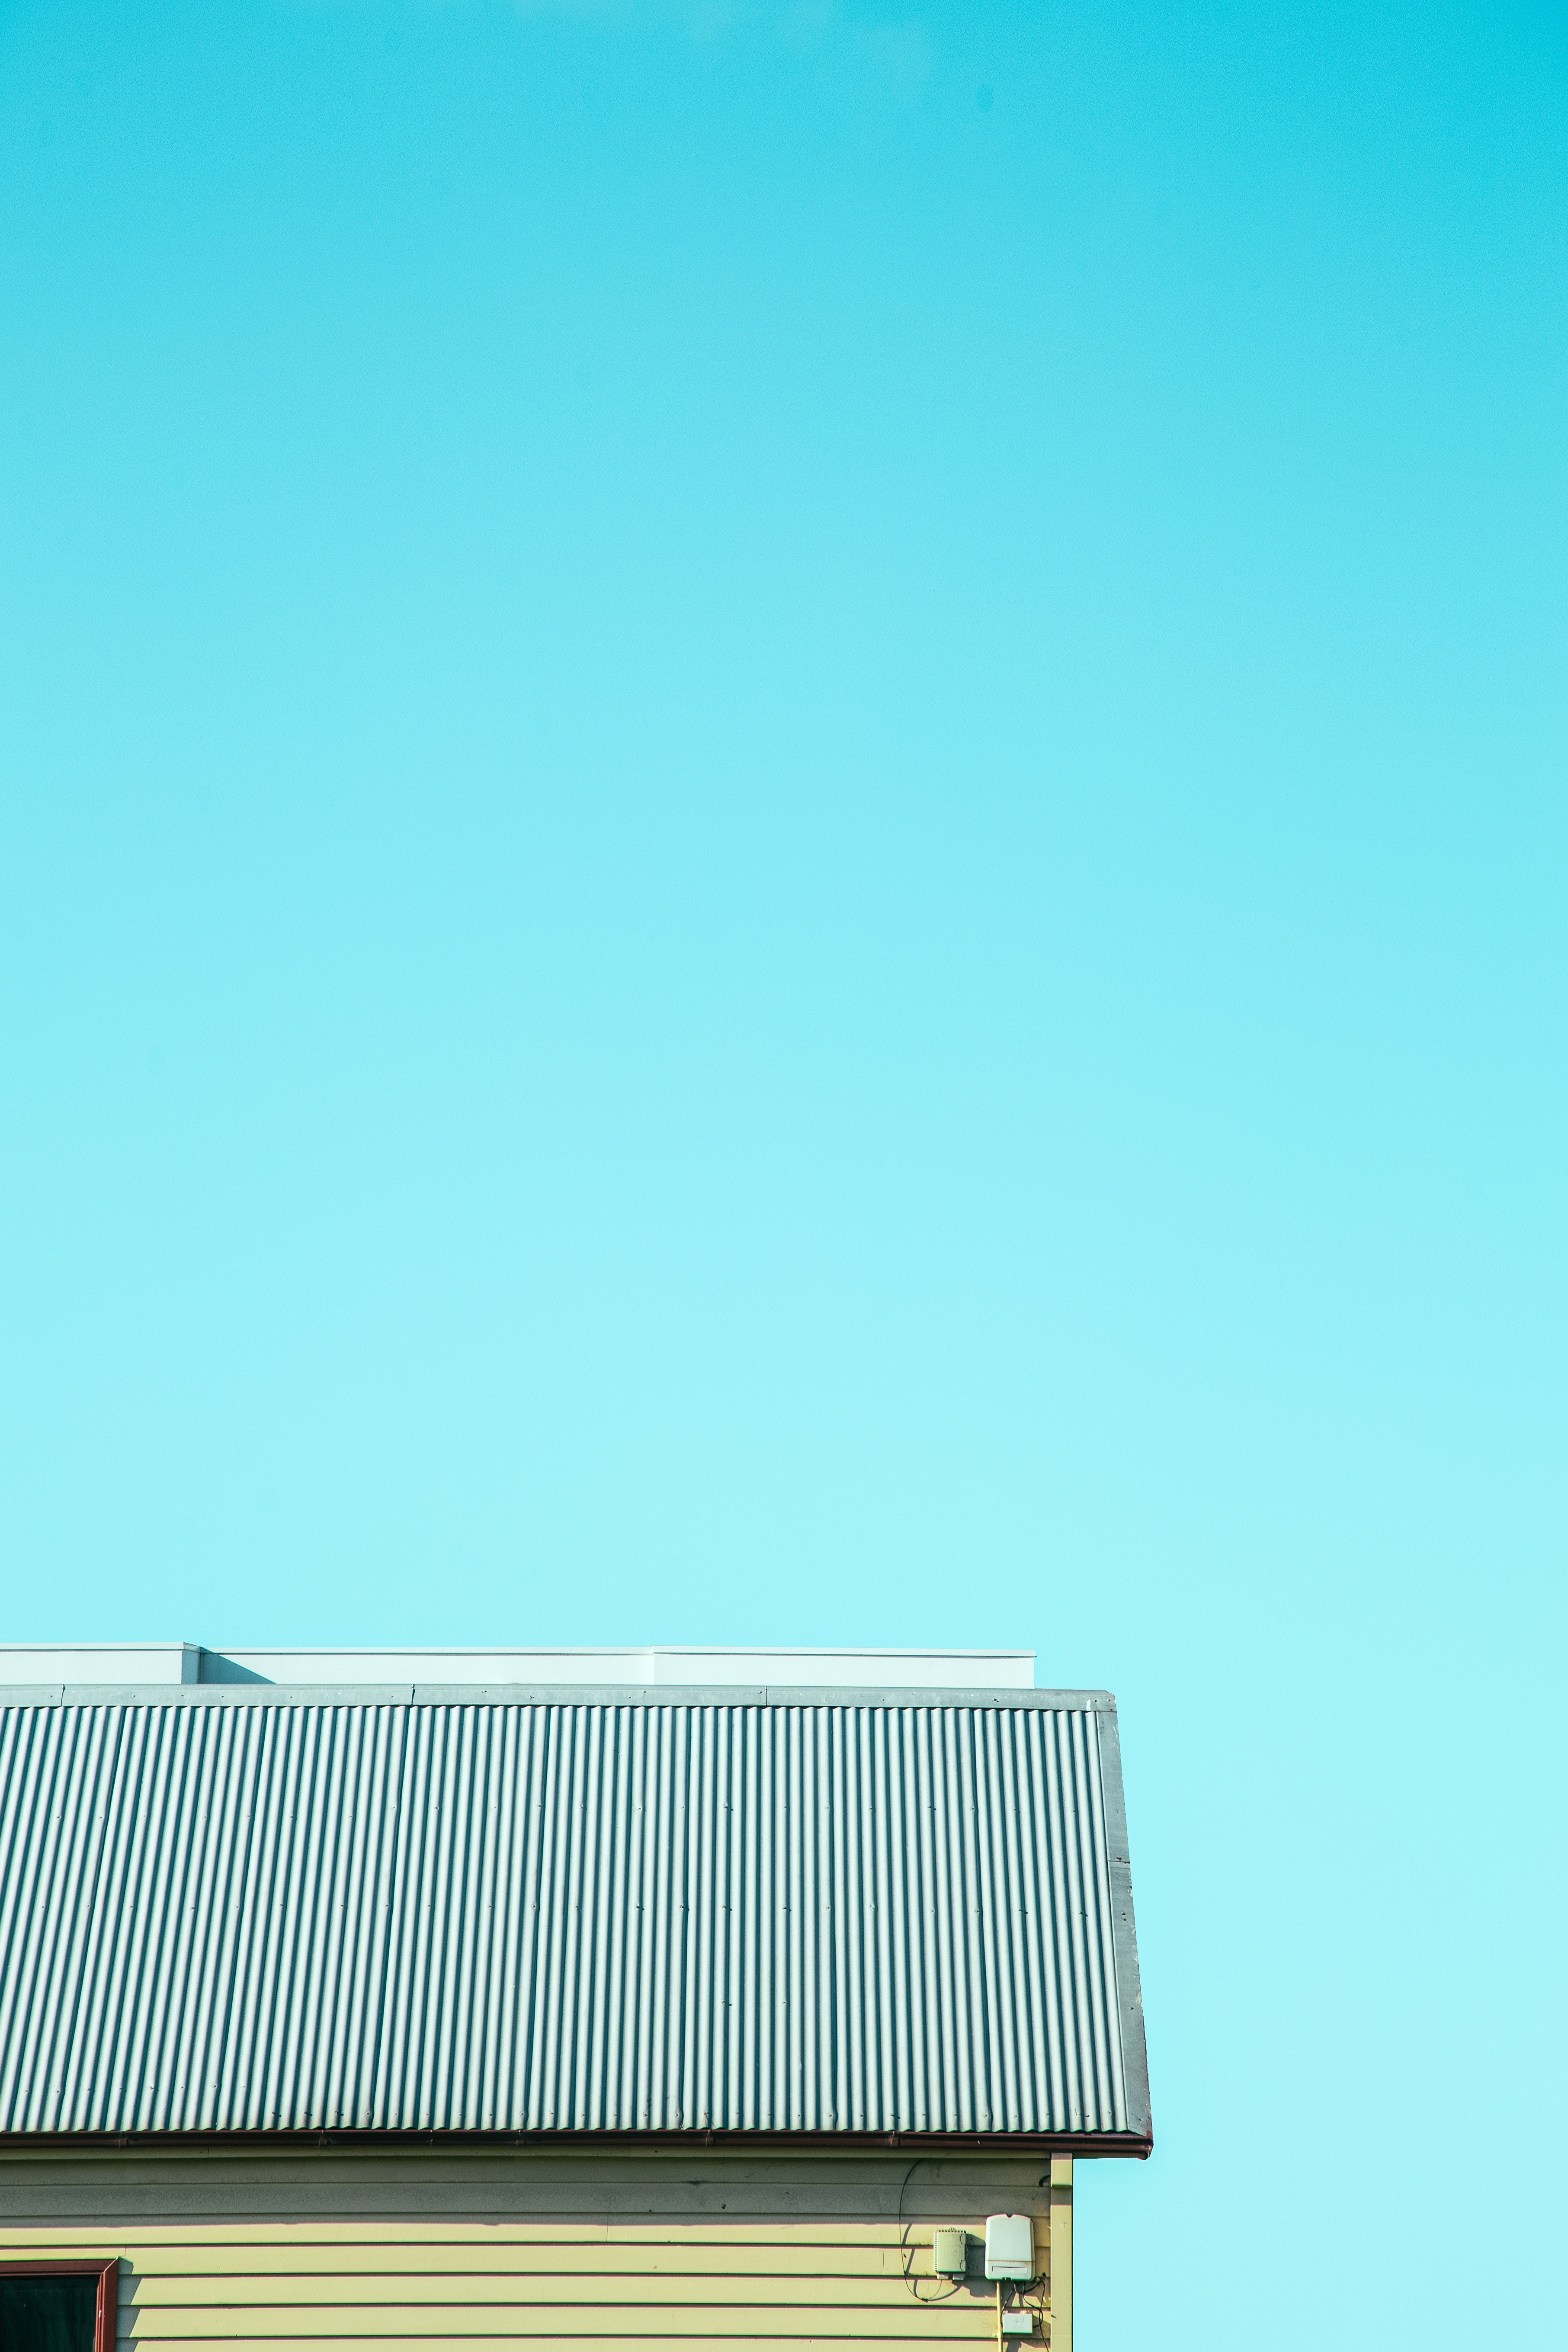 Wallpaper / house sky blue sky and minimalism HD 4k wallpaper free download